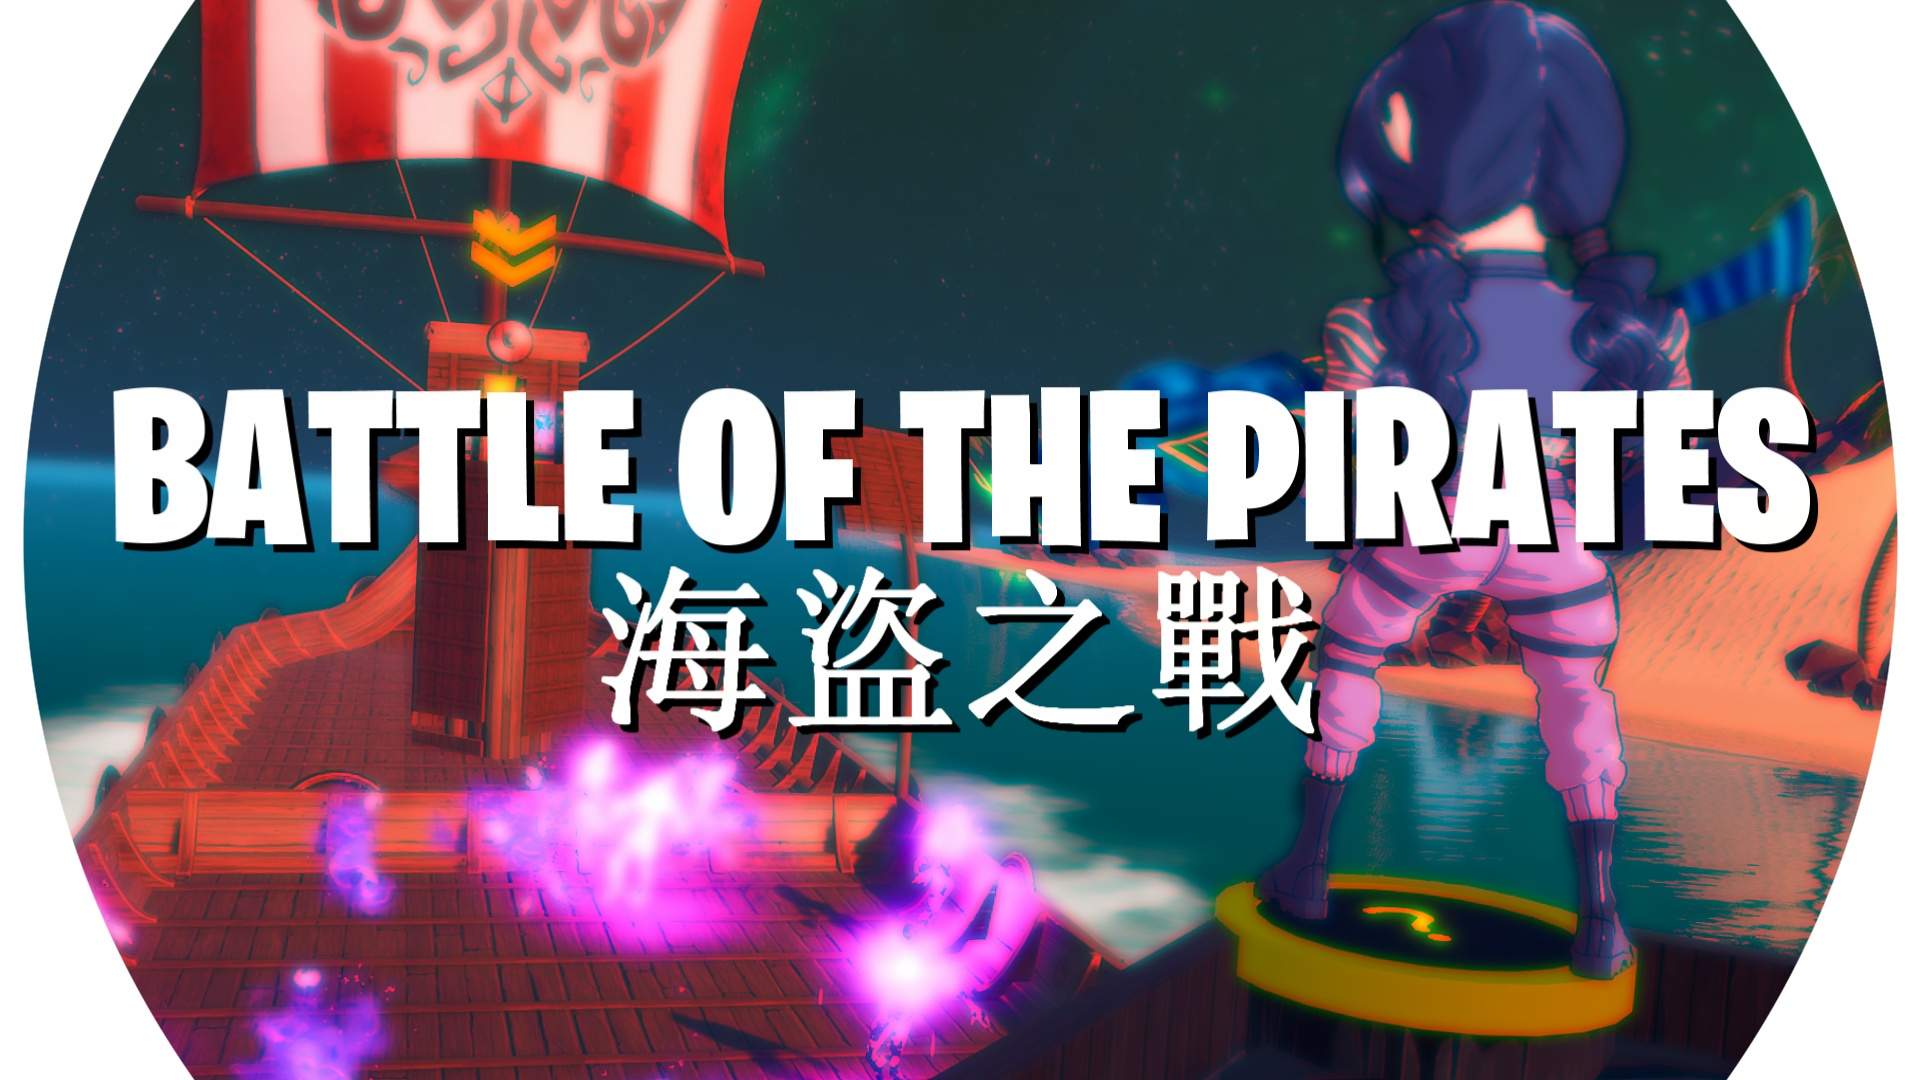 BATTLE OF THE PIRATES